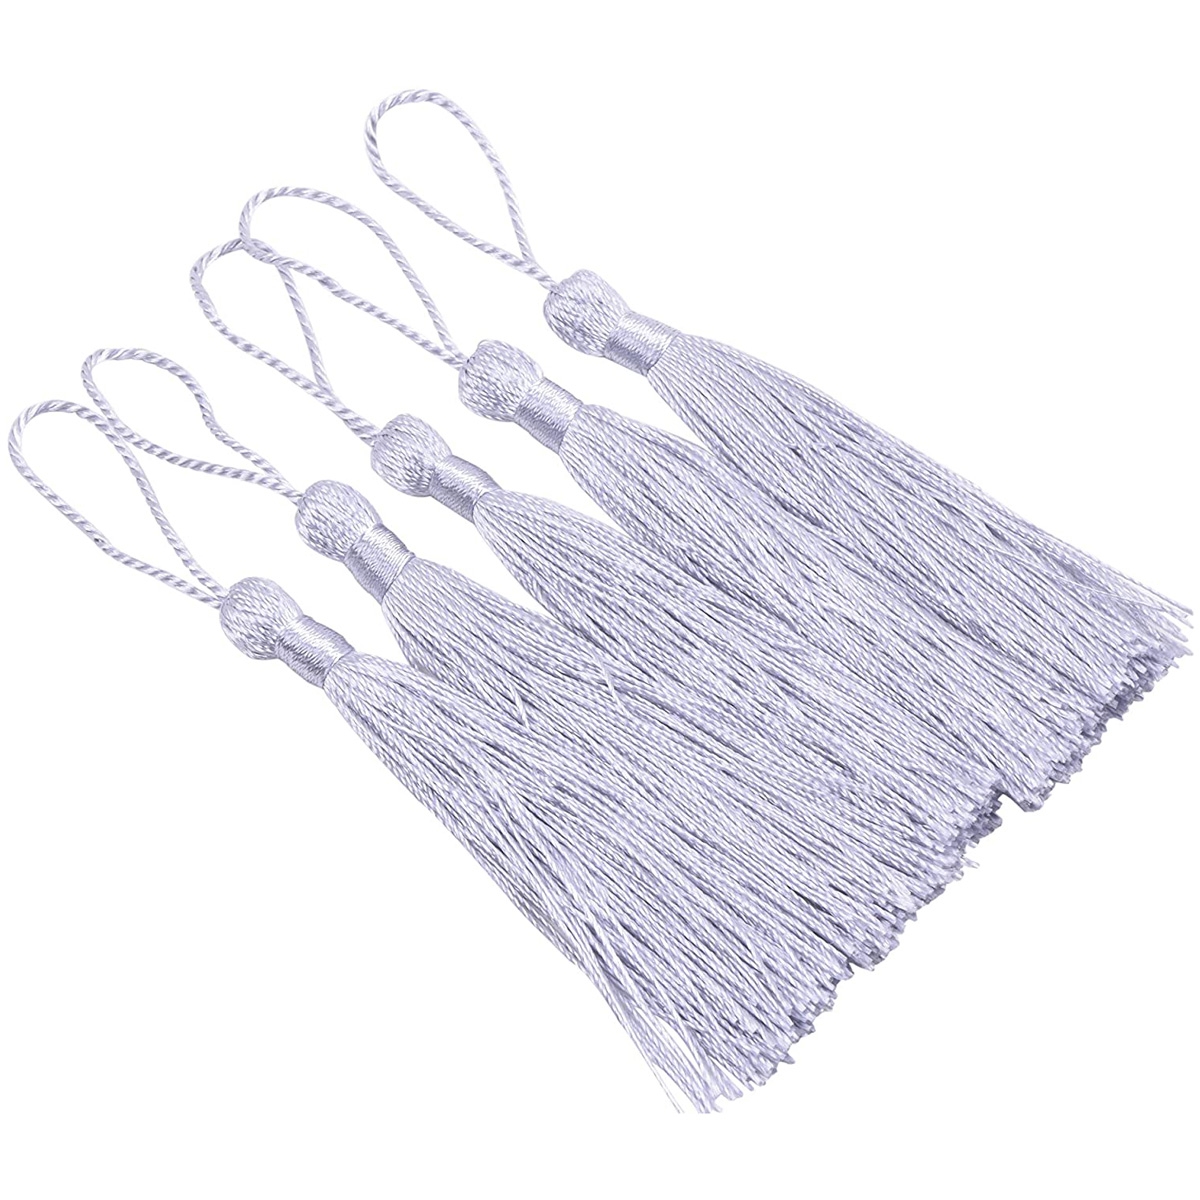 Soft Craft Mini Tassels with Loops for Bookmarks Jewelry Making, Decoration DIY Projects (Silver)